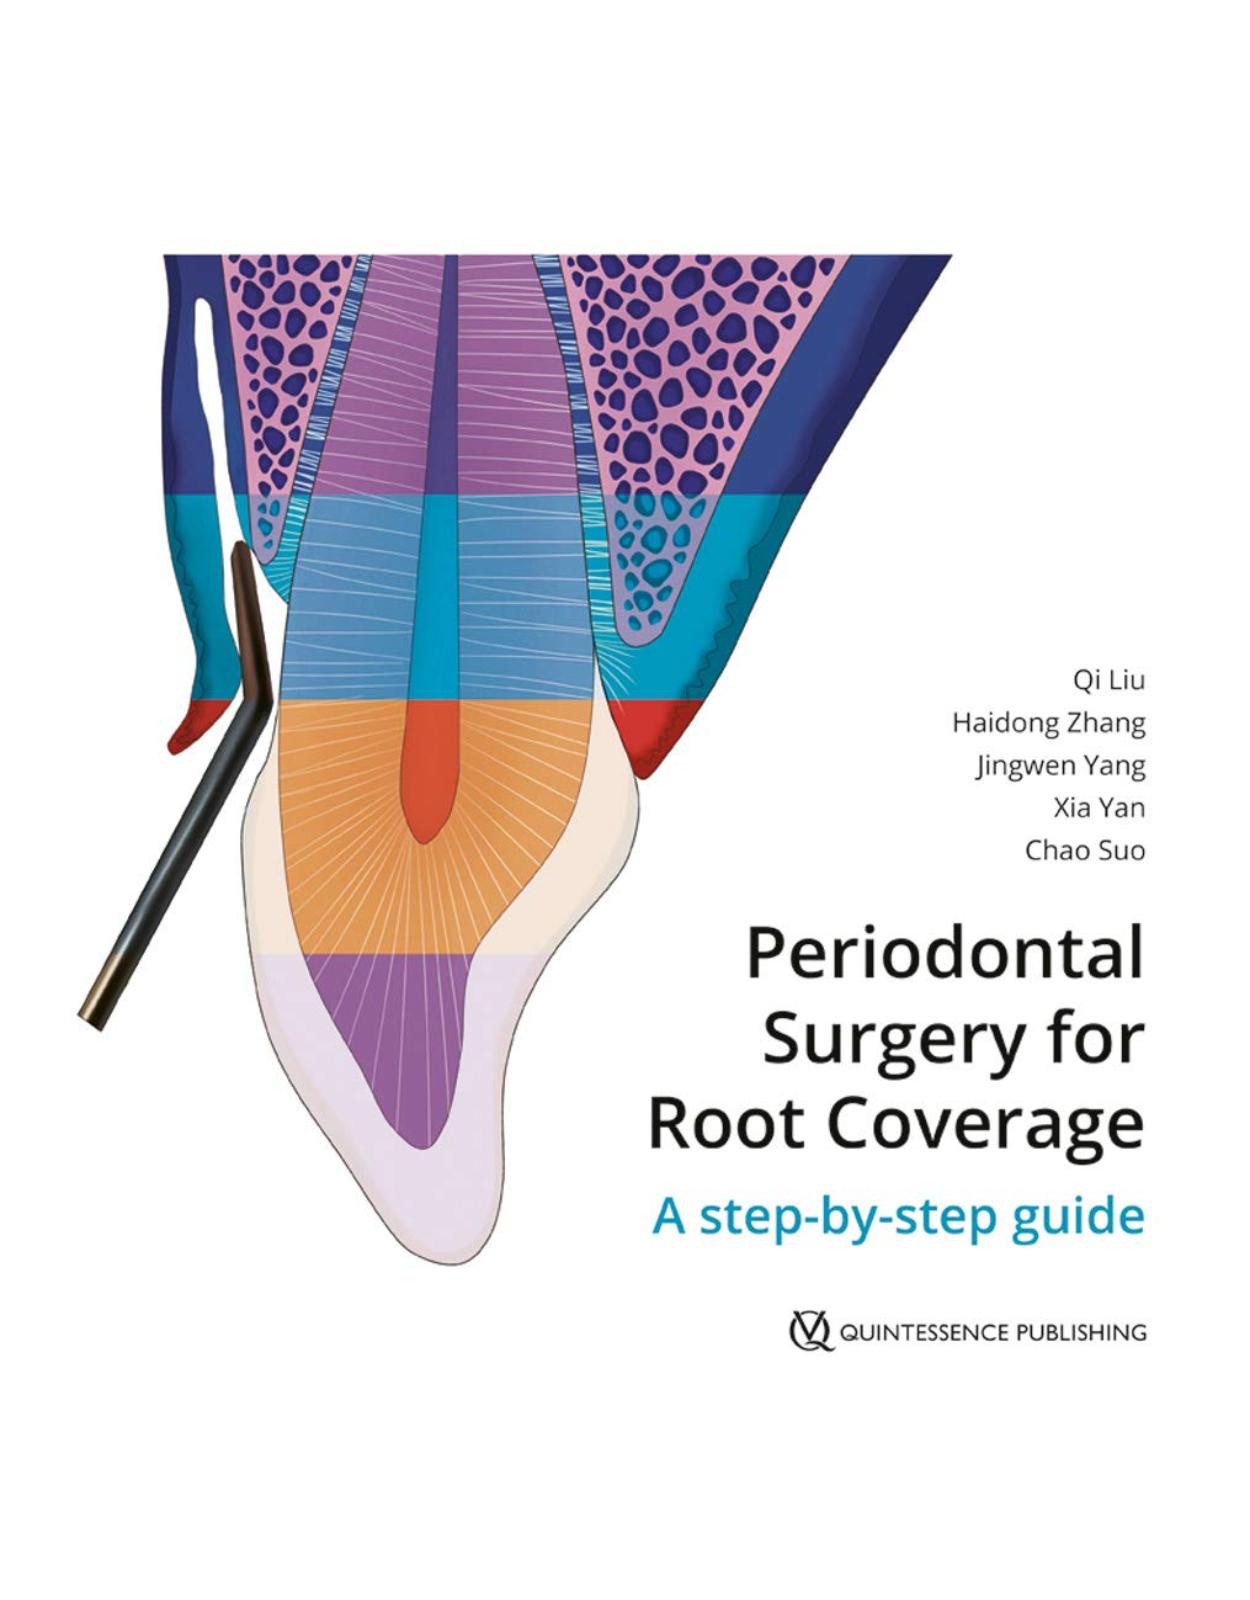 Periodontal Surgery for Root Coverage: A step-by-step guide